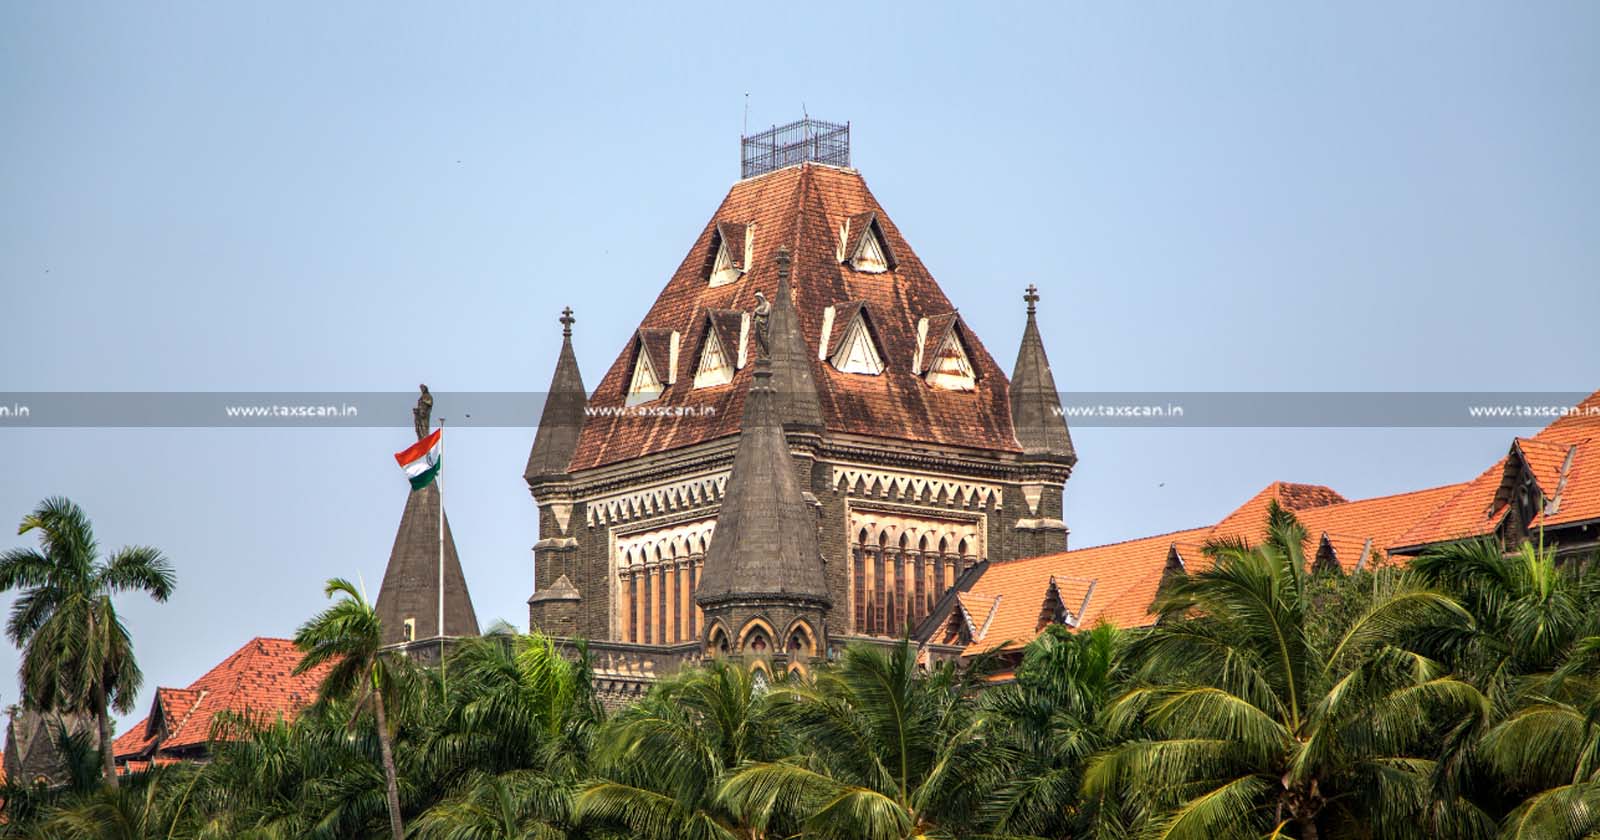 Bombay High Court - Bombay HC - Assessment Order - Principles of Natural Justice - Denial of Fair Personal Hearing - Taxscan